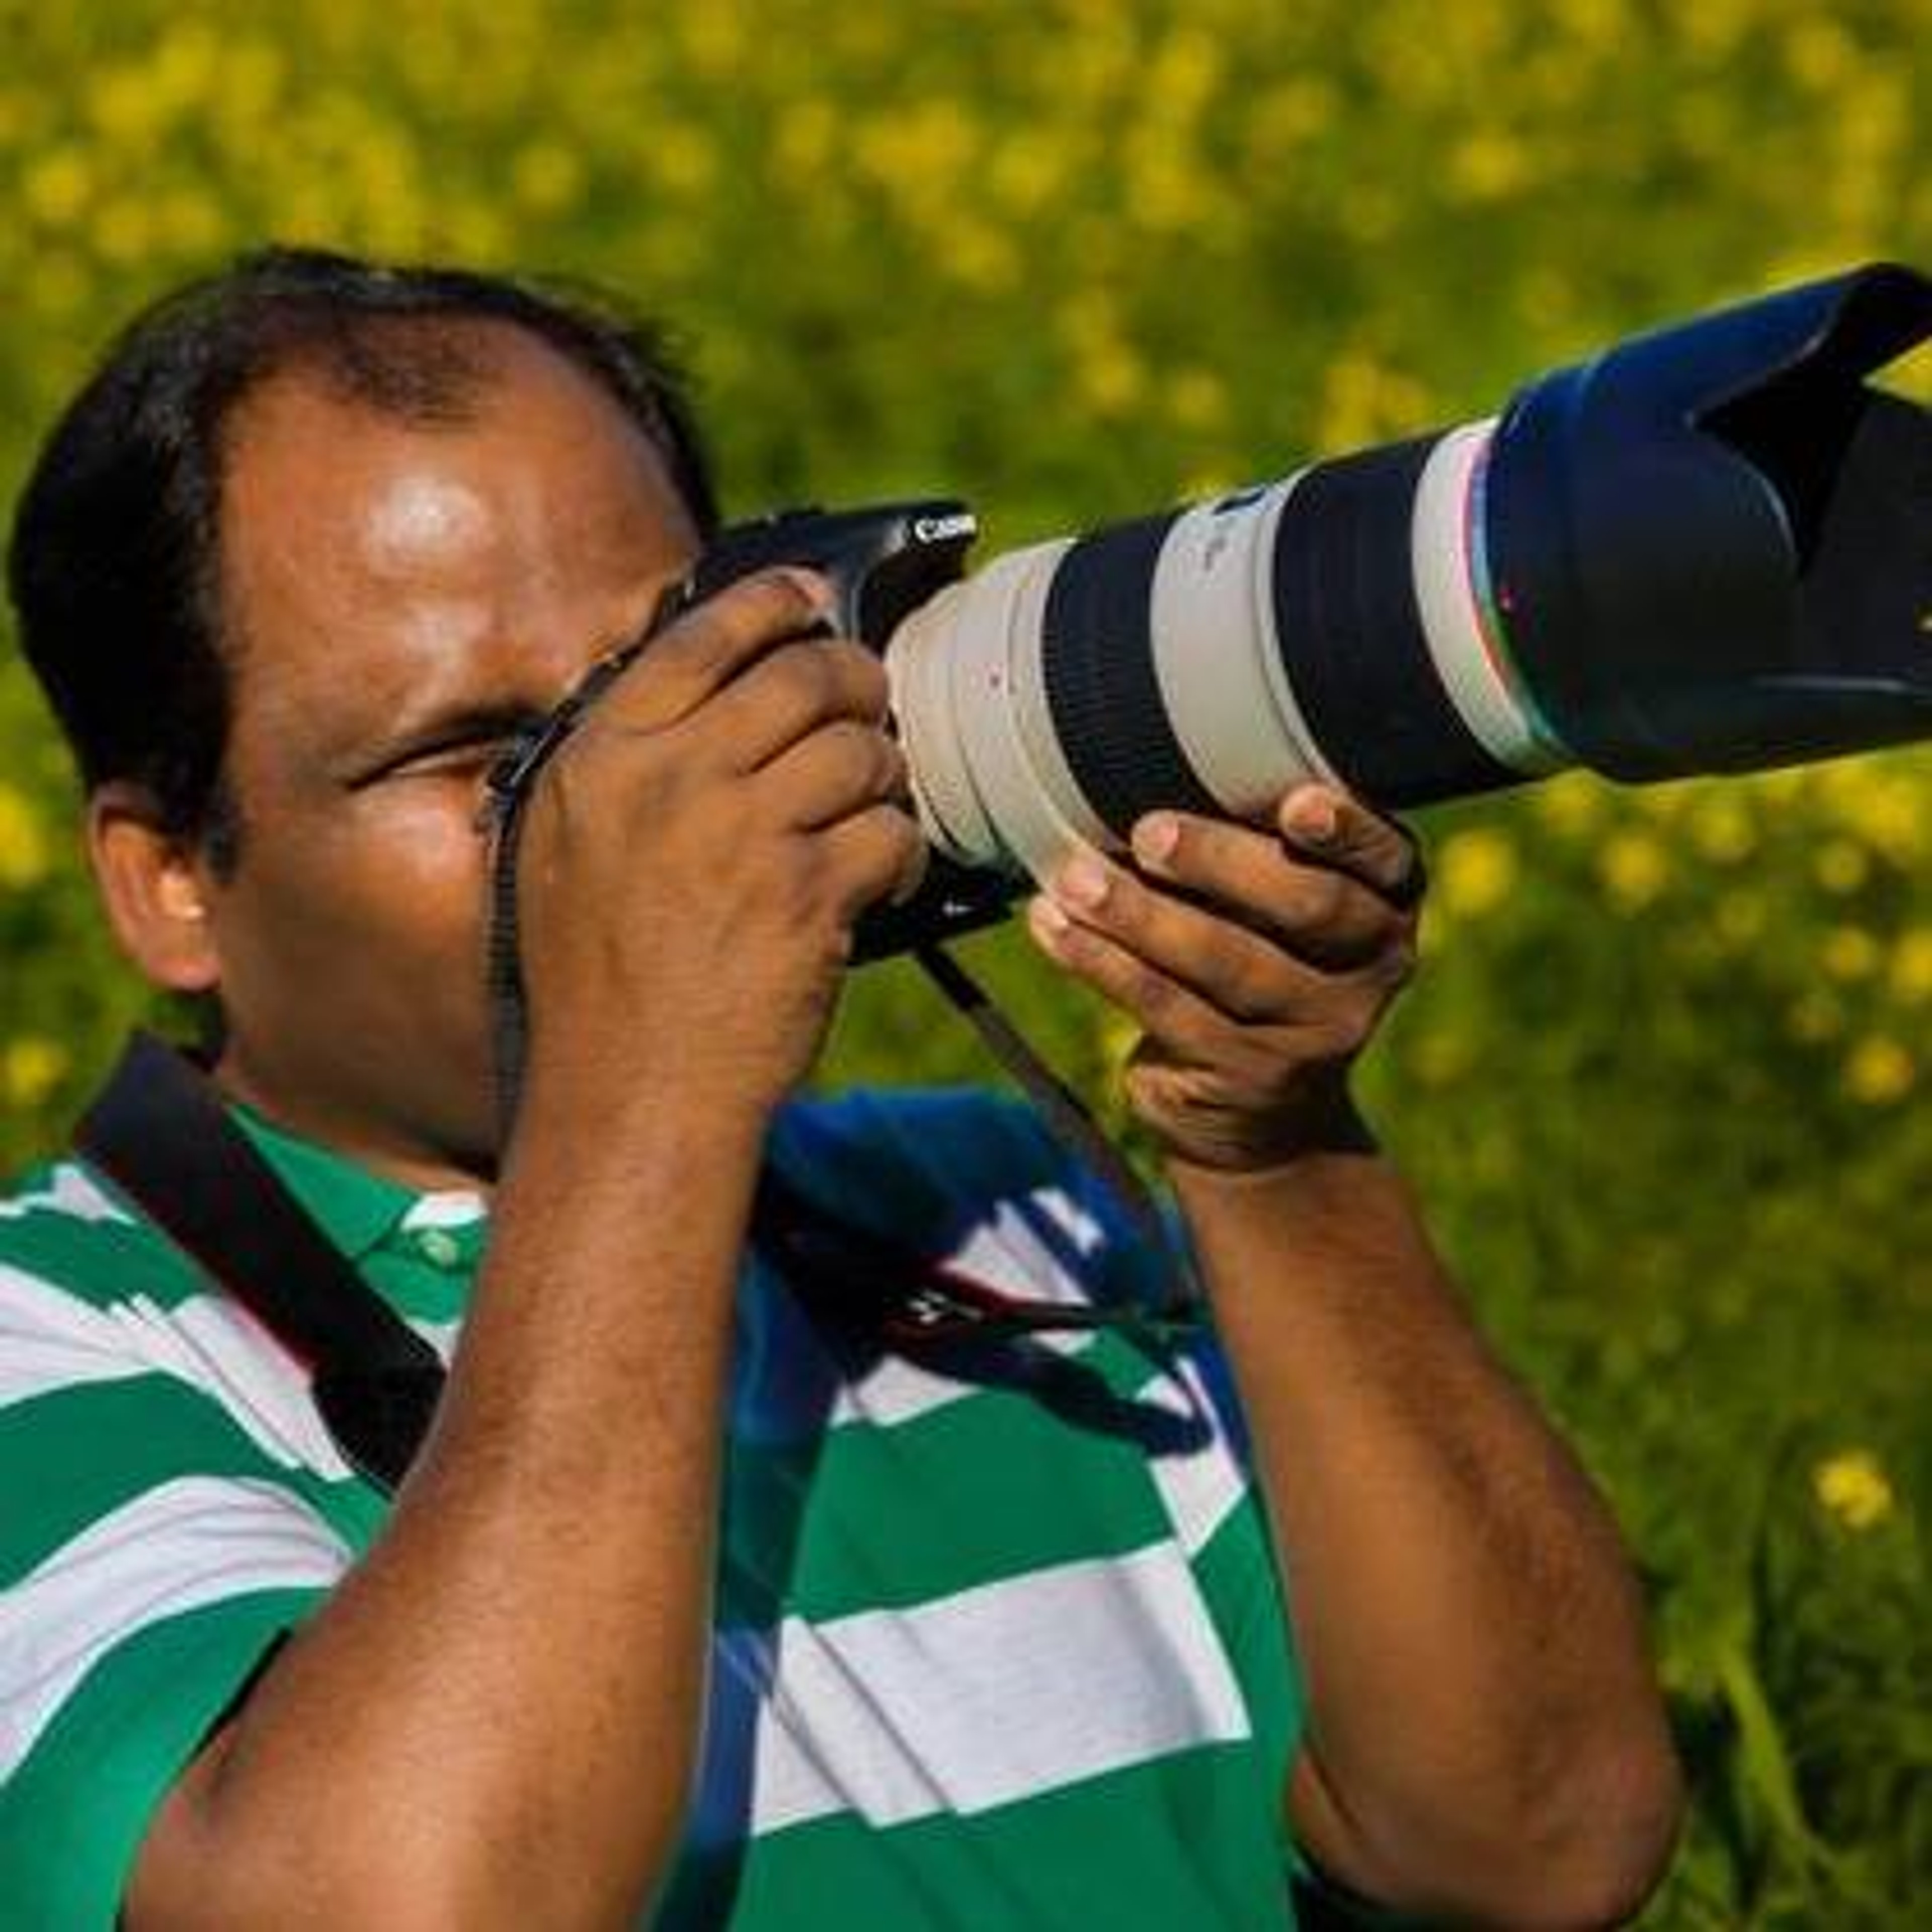 Excellent photographer available